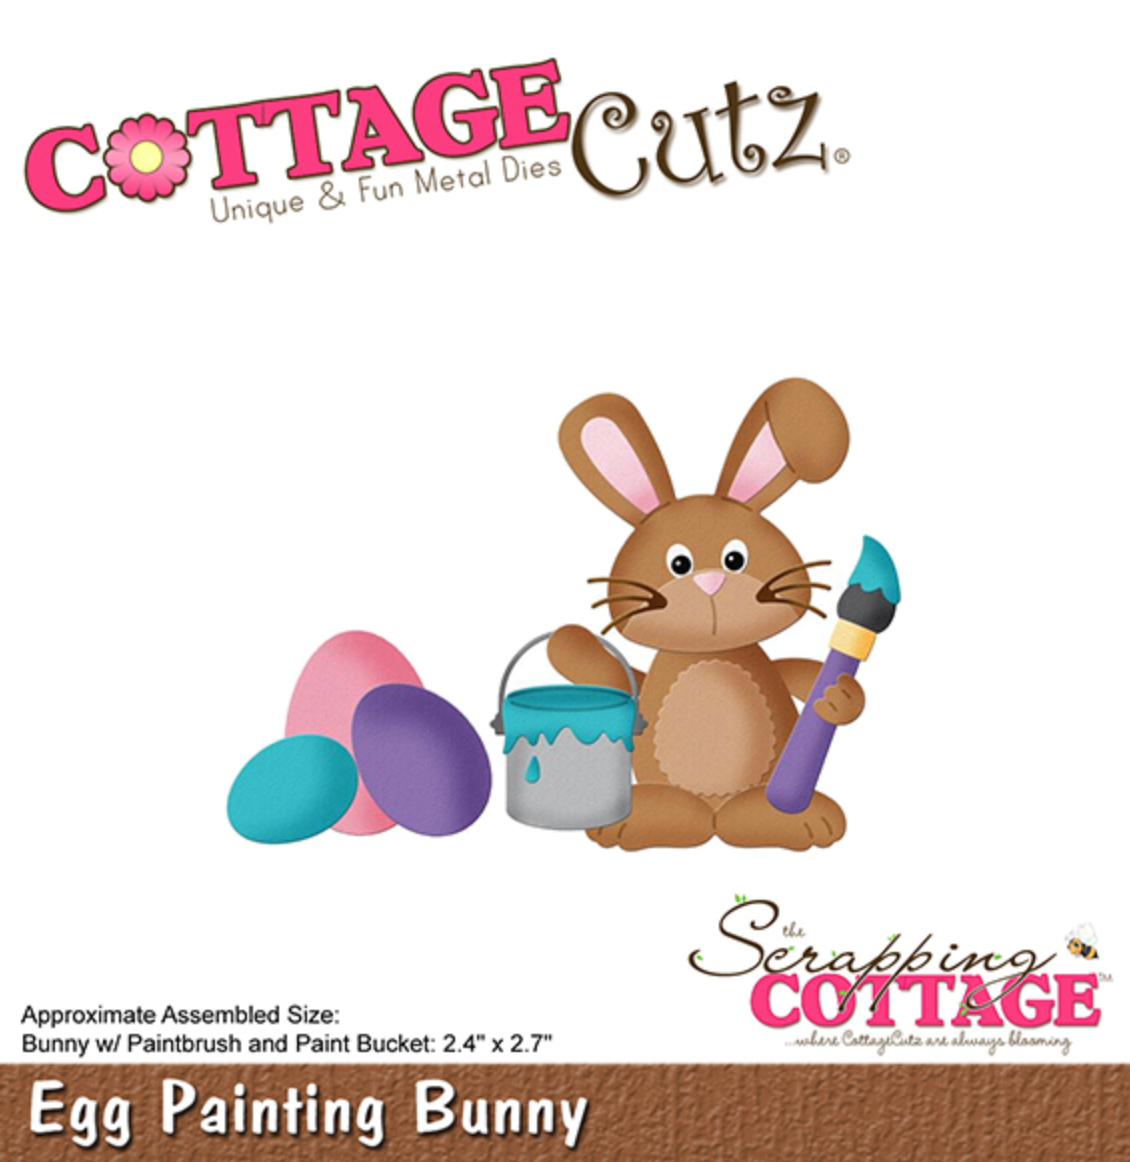 4x4 Egg Painting Bunny - Die - Cottage Cutz